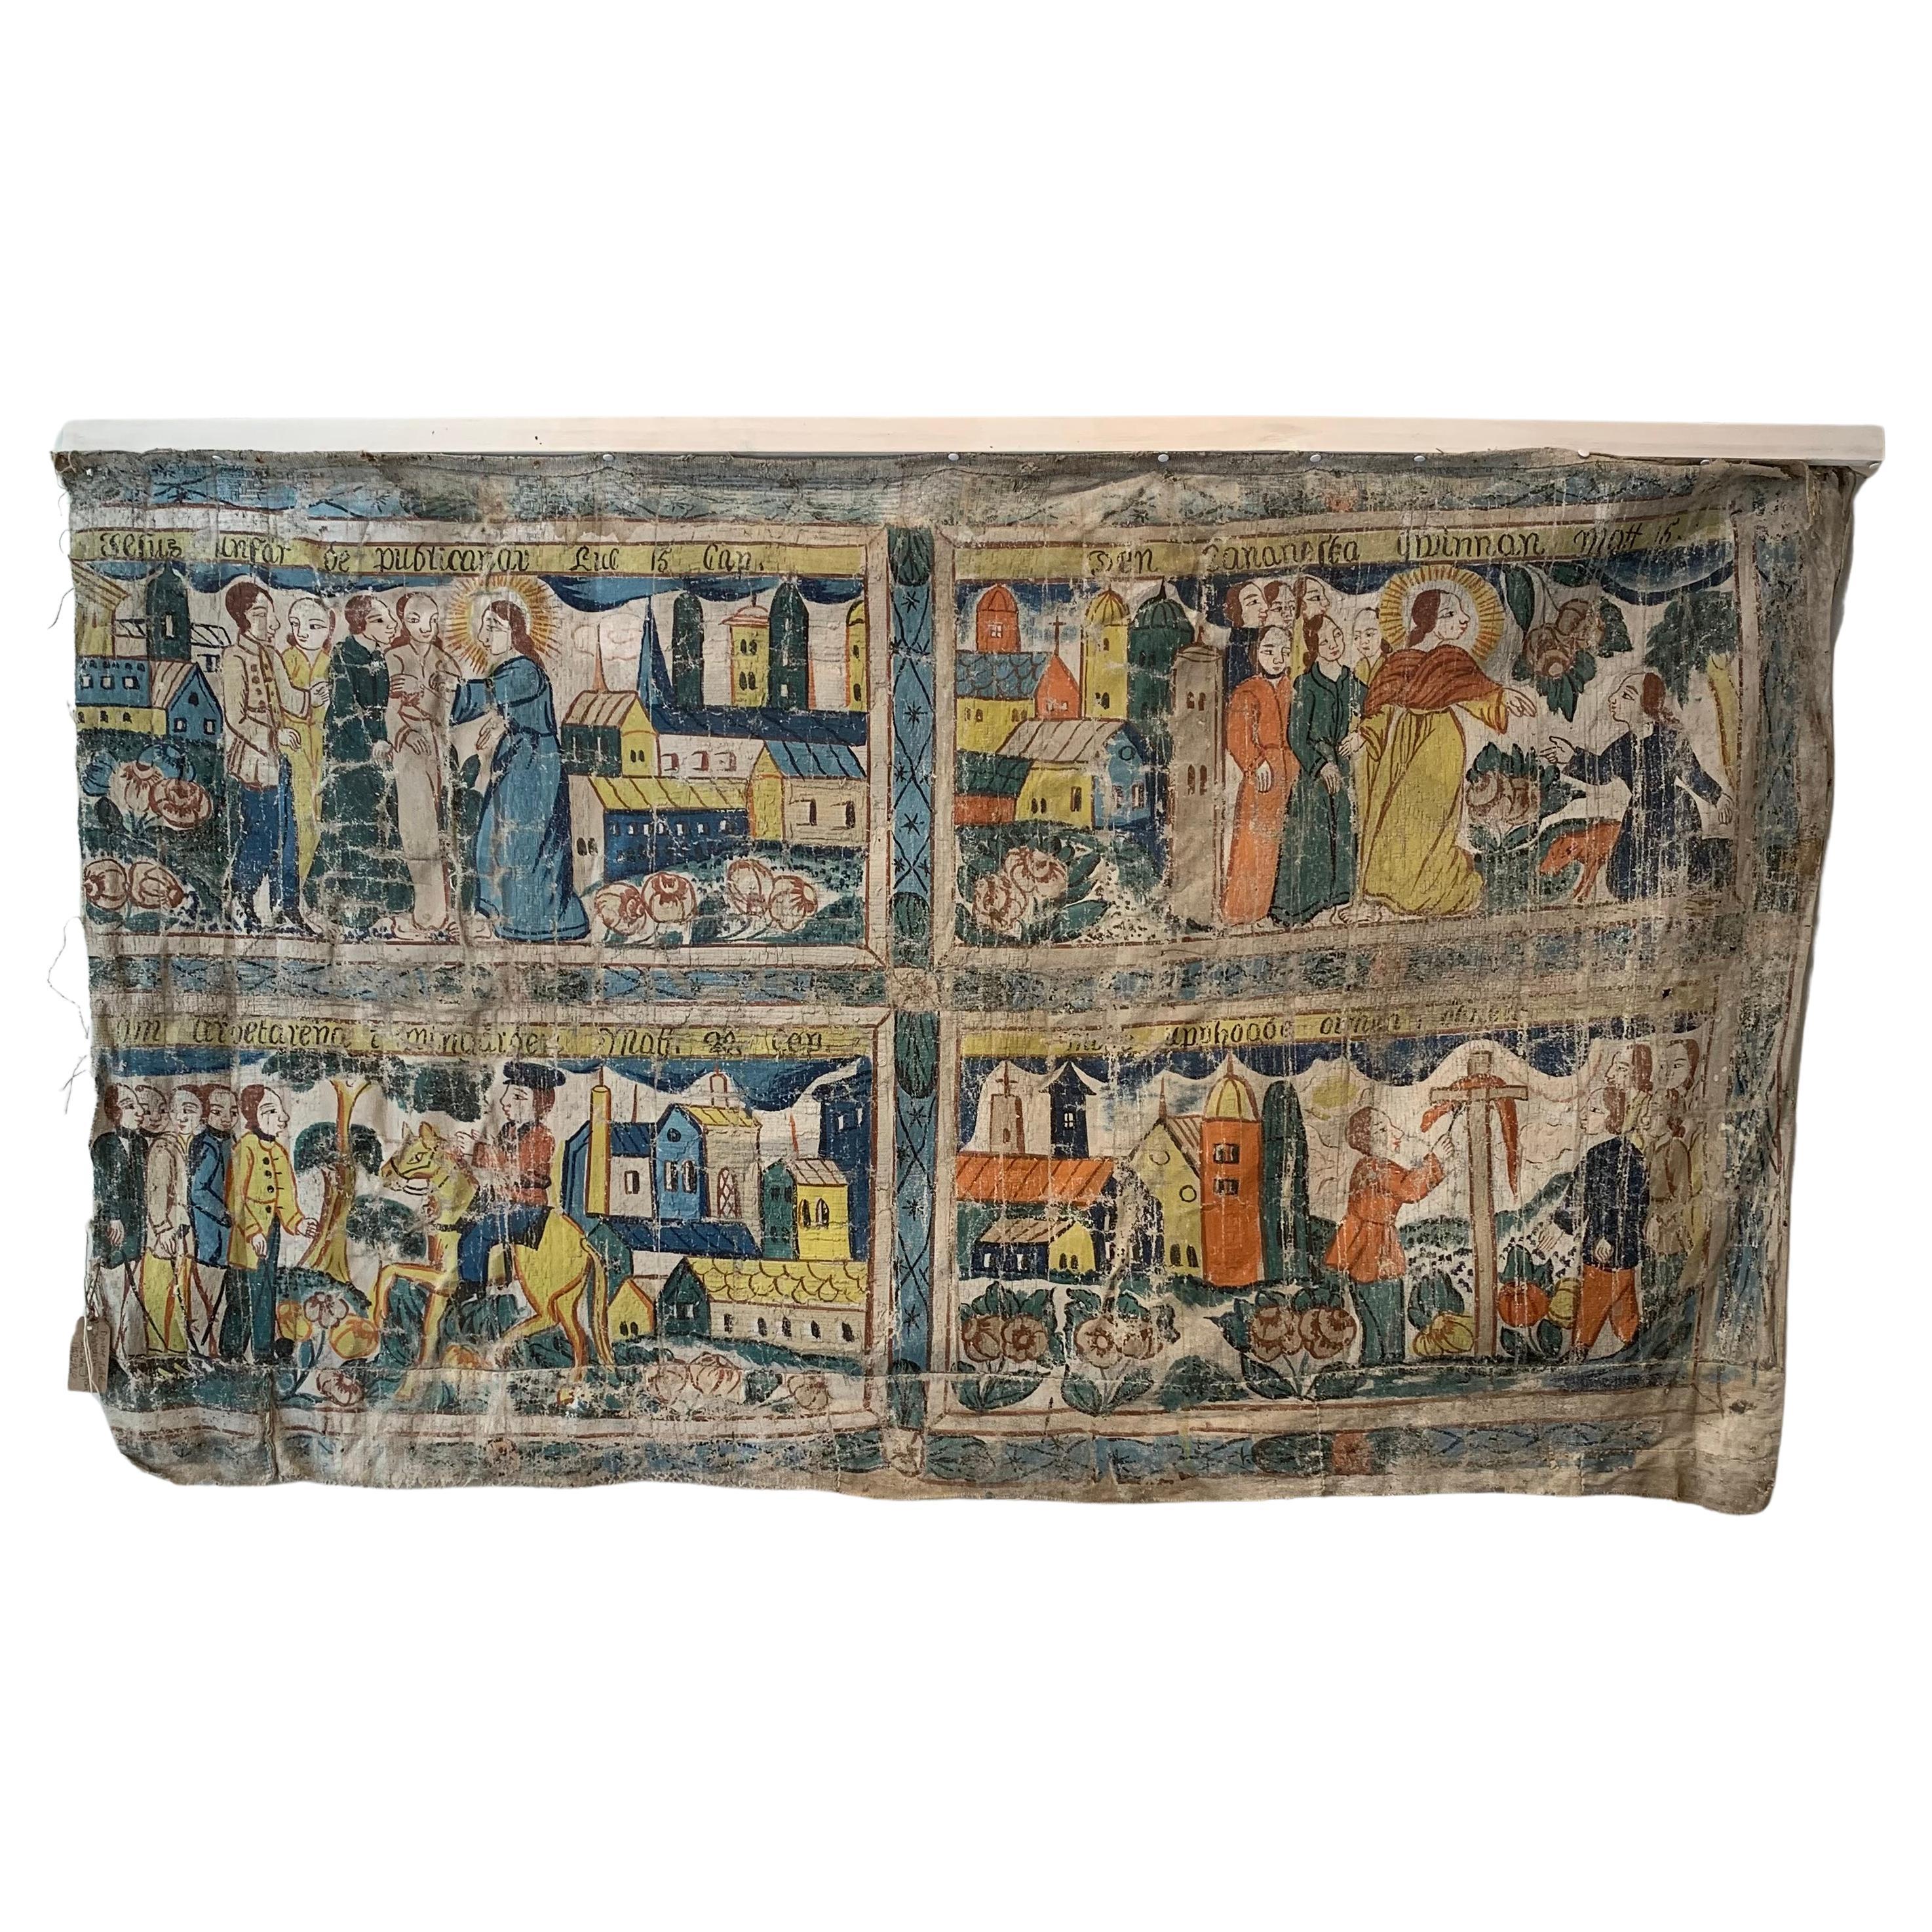 Late 18th century Decorative Double Sided Swedish Folk Biblical Wall Hanging  For Sale